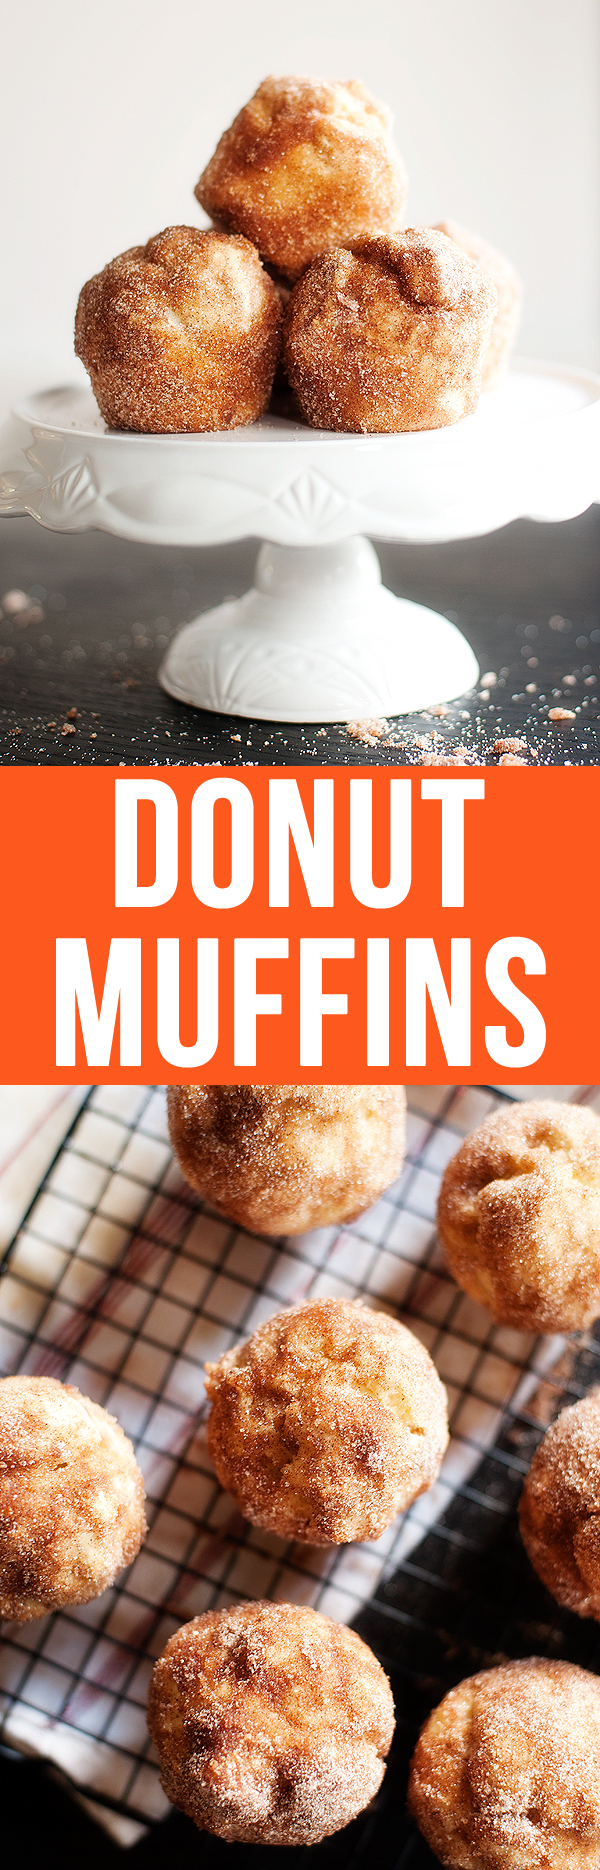 donut_muffins_pin